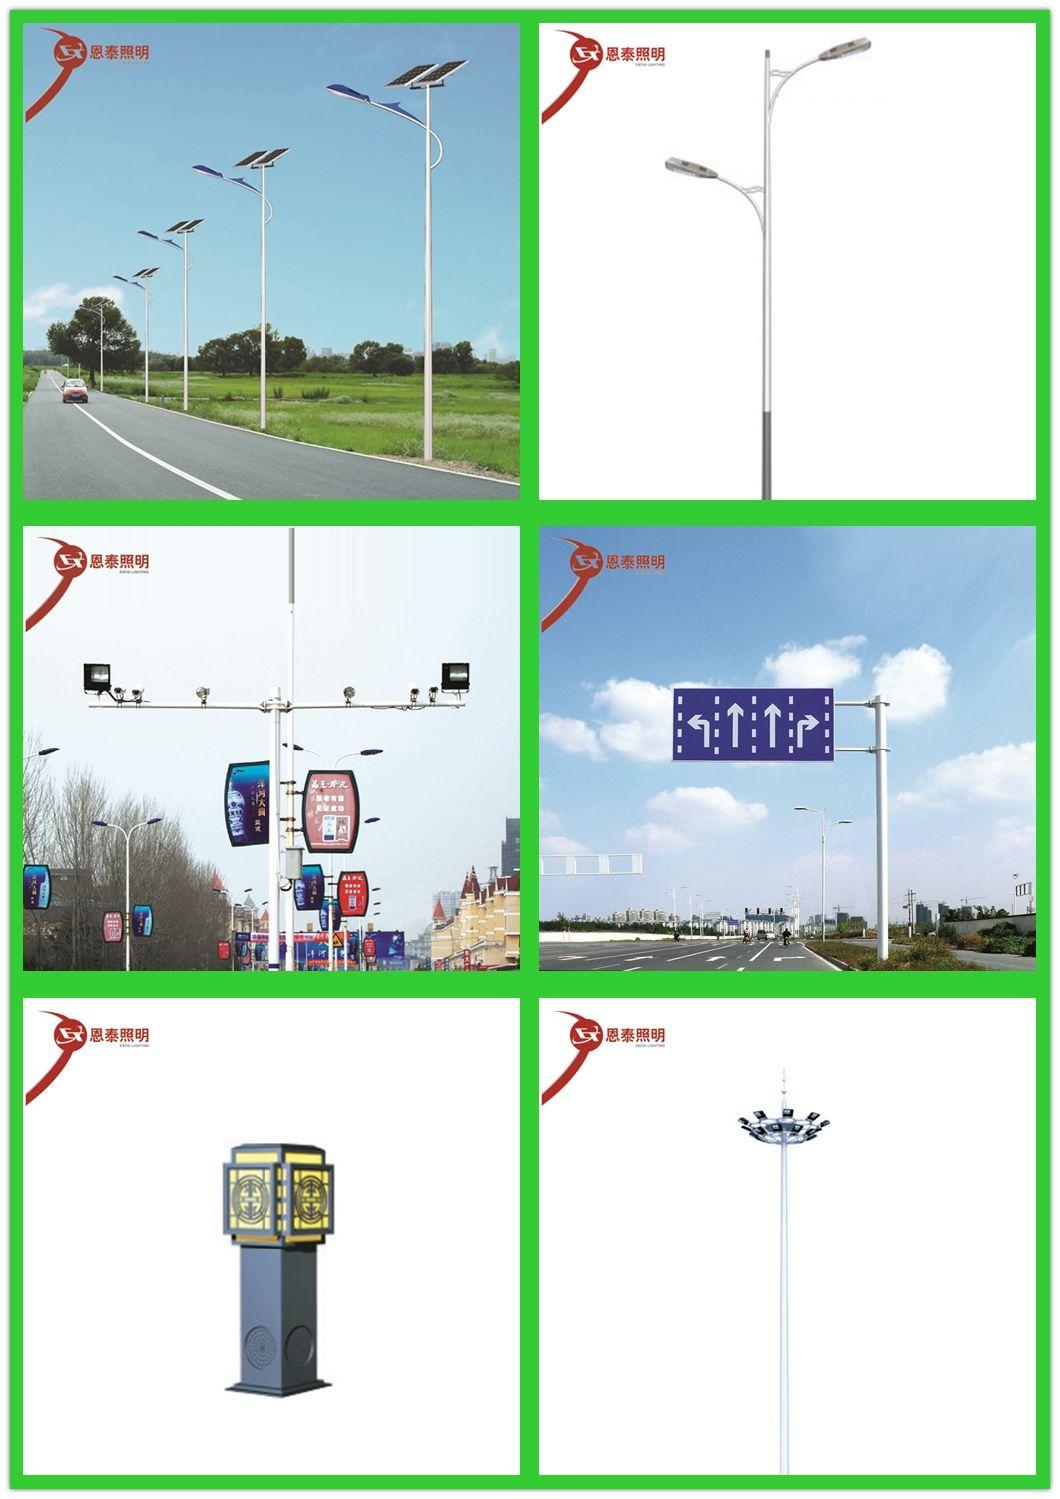 80W IP65 CCTV Camera Integrated All in One Solar LED Street Light